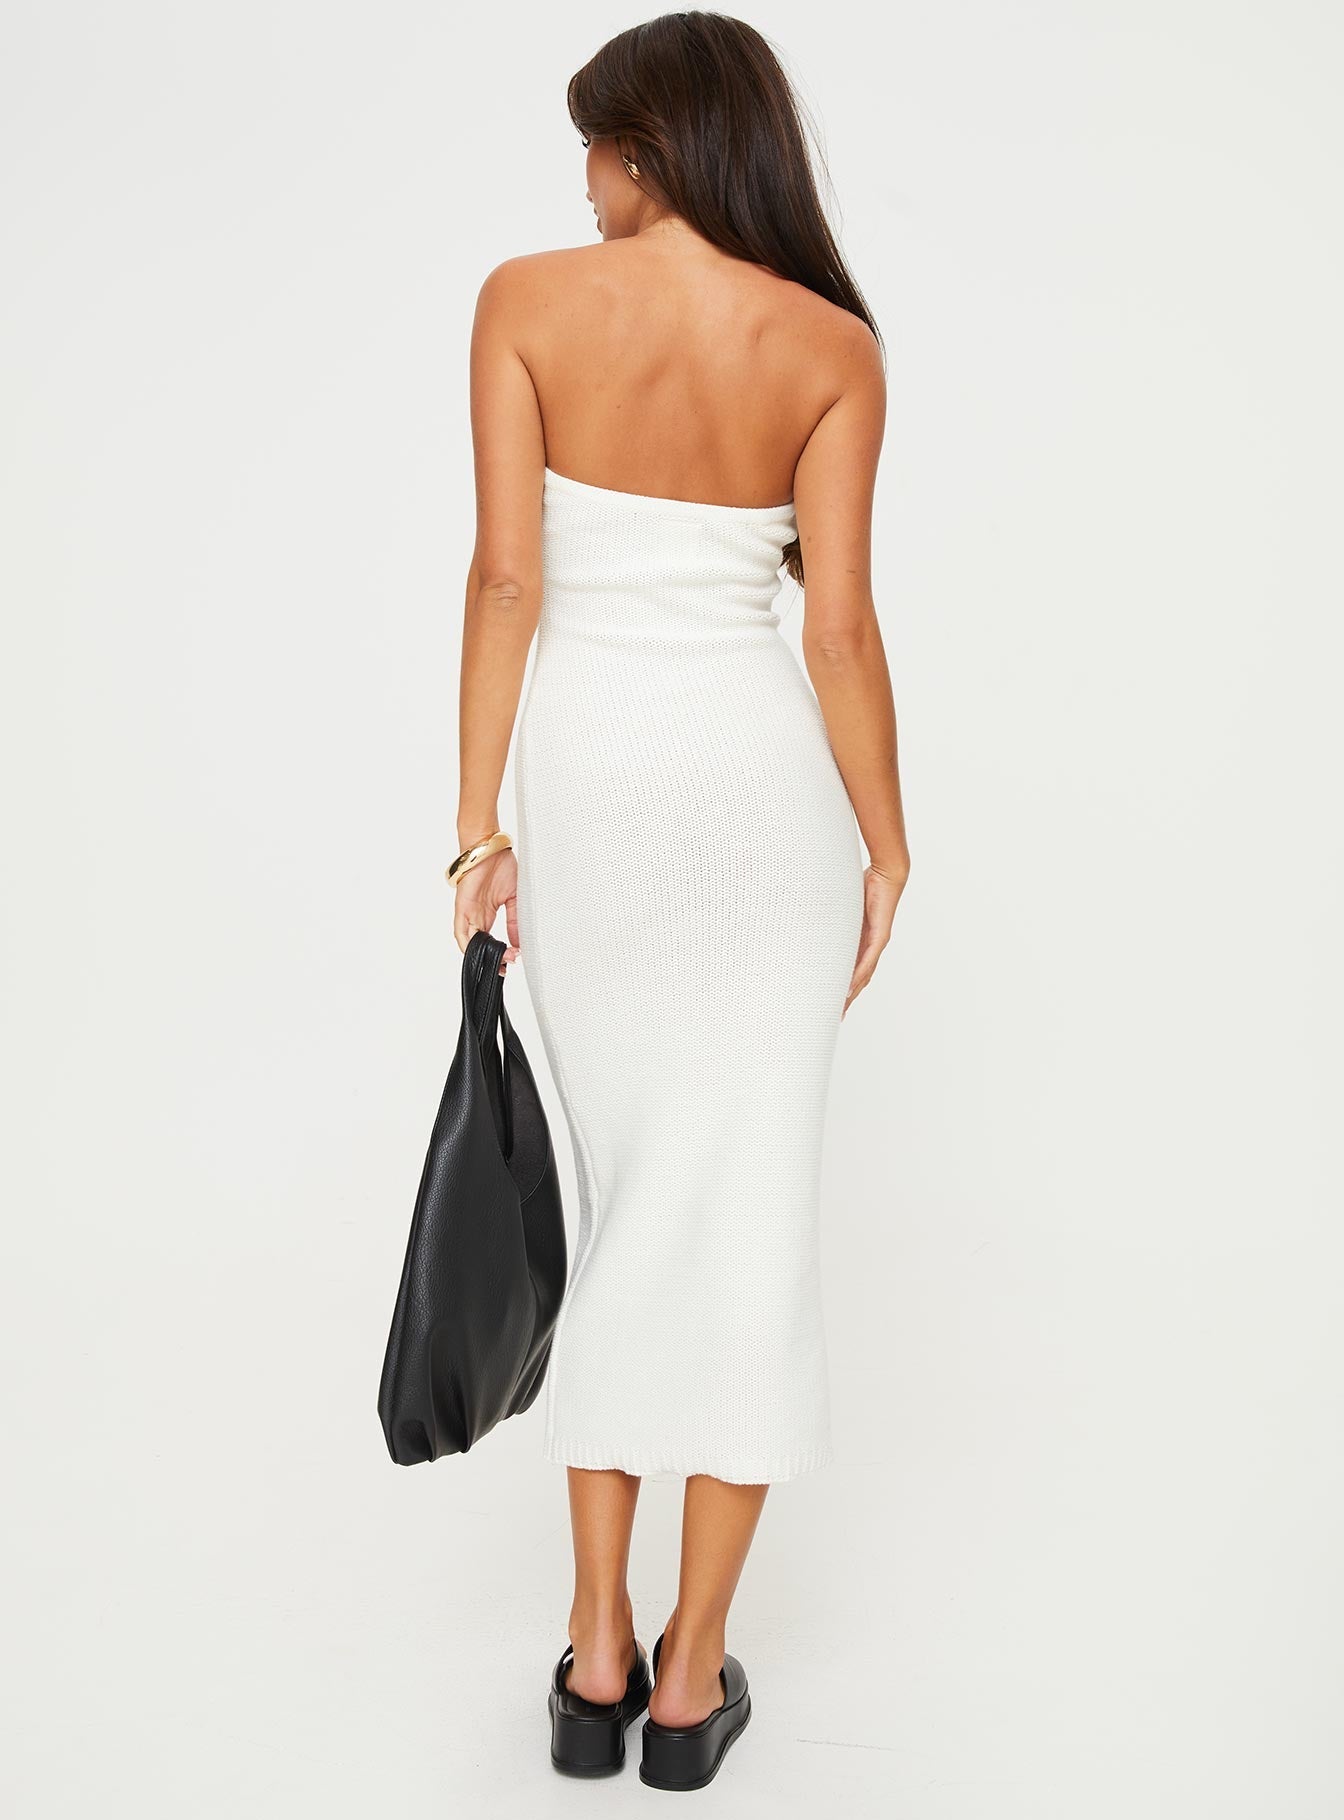 Shop Formal Dress - Flow Strapless Maxi Dress White featured image